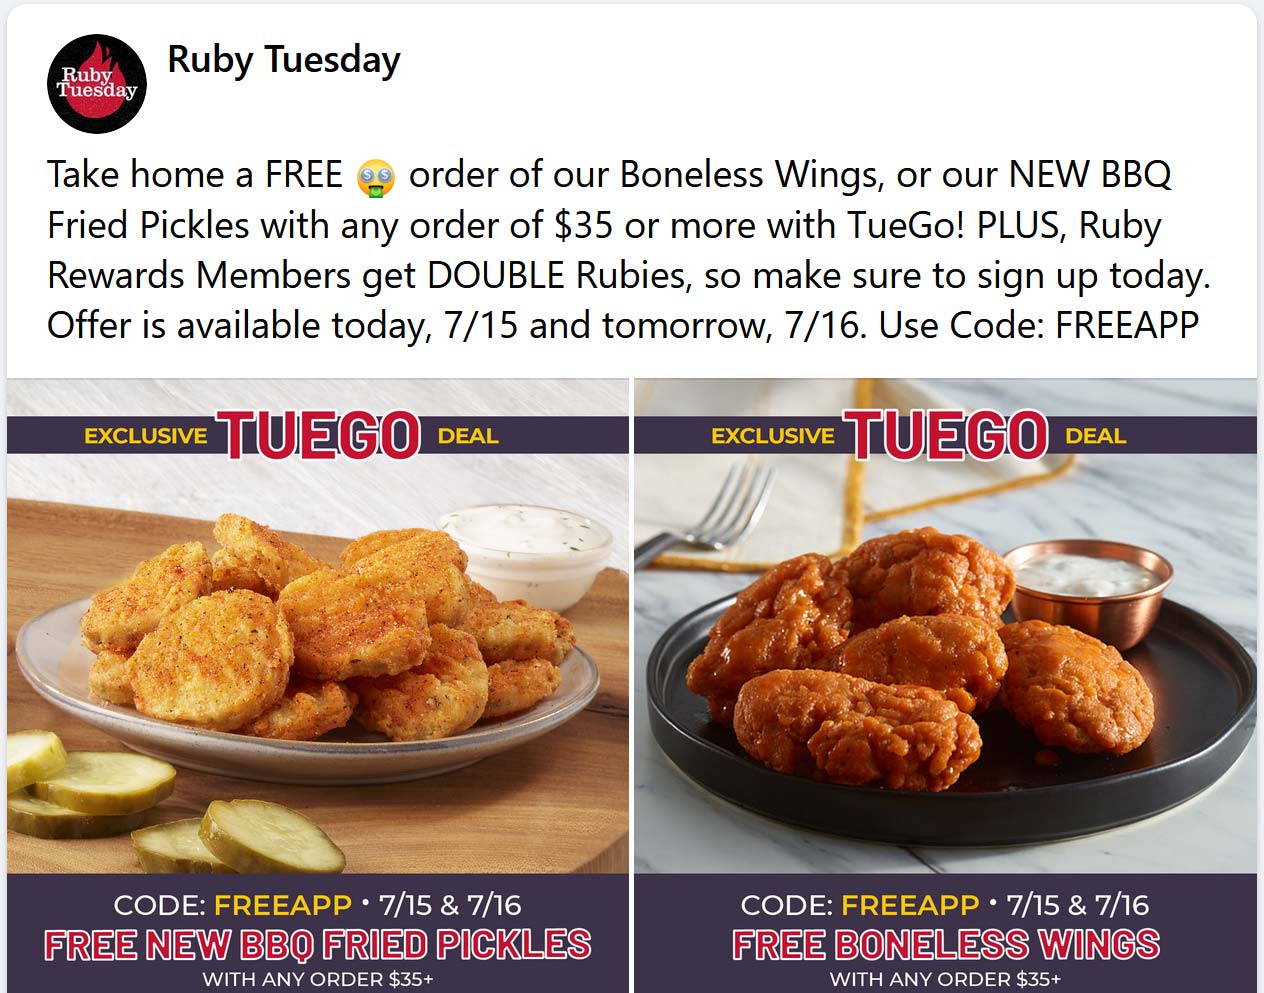 Ruby Tuesday restaurants Coupon  Free boneless wings or fried pickles on $35 today at Ruby Tuesday restaurants #rubytuesday 